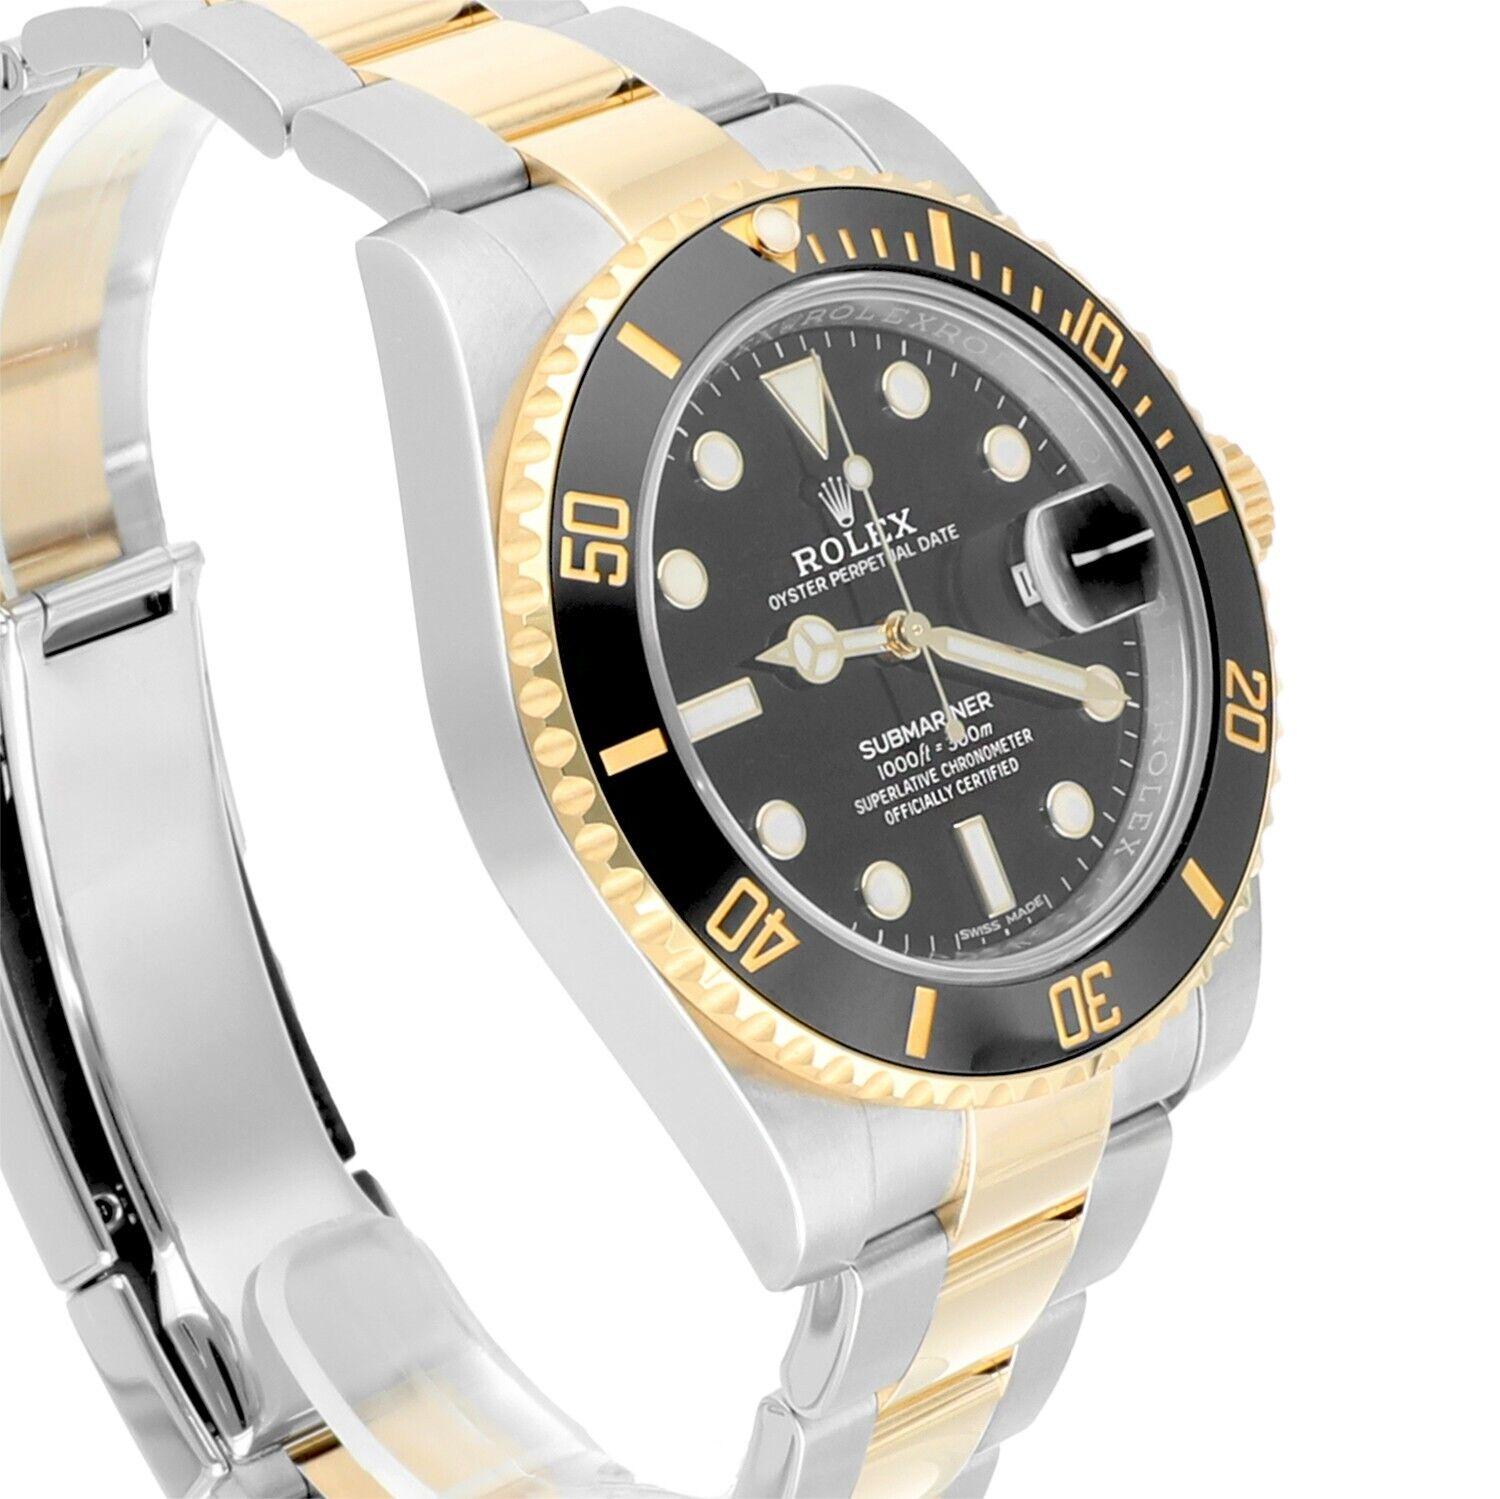 Rolex Submariner Date 116613LN Black Dial 18k Gold/Steel Ceramic Complete Watch For Sale 1